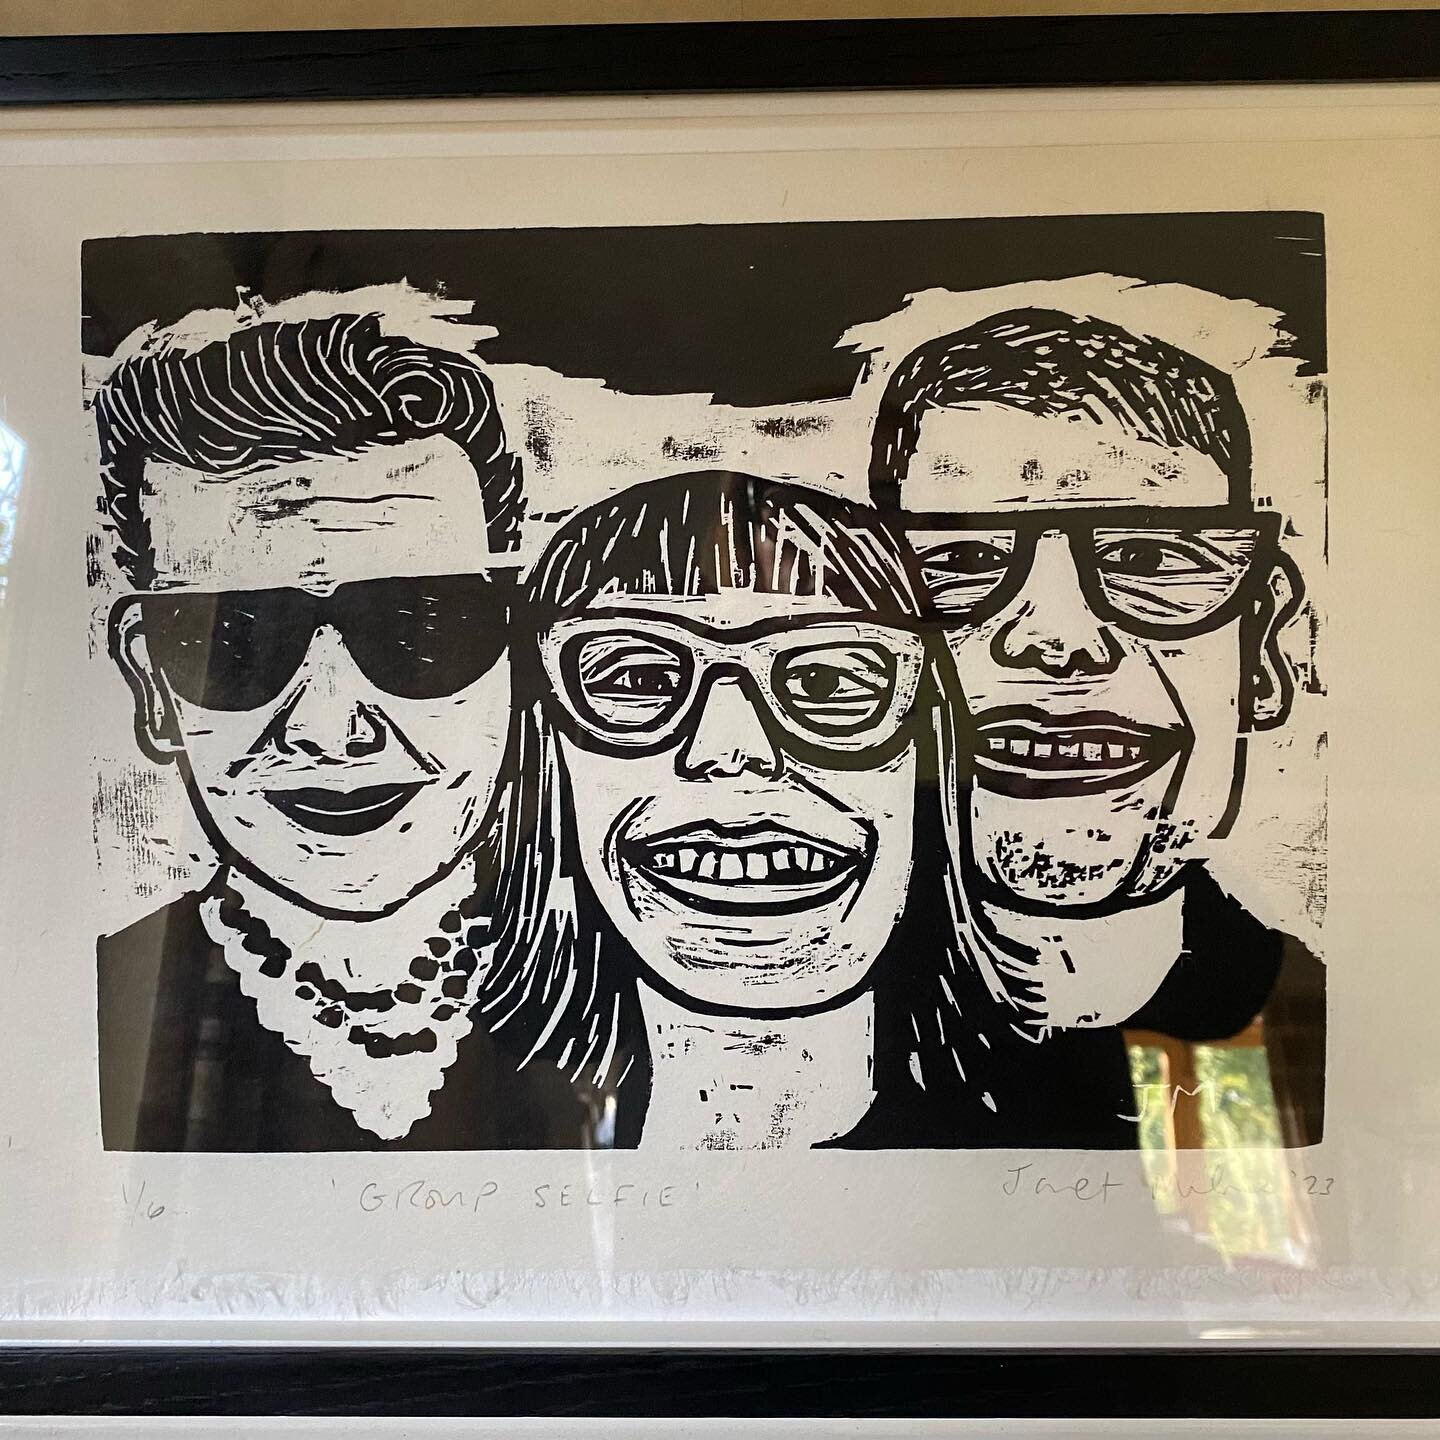 Janet Milner
&lsquo;Group Selfie&rsquo;  wood cut
 
&lsquo;Small but Mighty&rsquo; printmaking show @banksidegallery 
270 small scale works in Printmaking selected by Jonny Hannah  @darktownresident
@re_printmakers #worksonpaper #printmaking #drawing